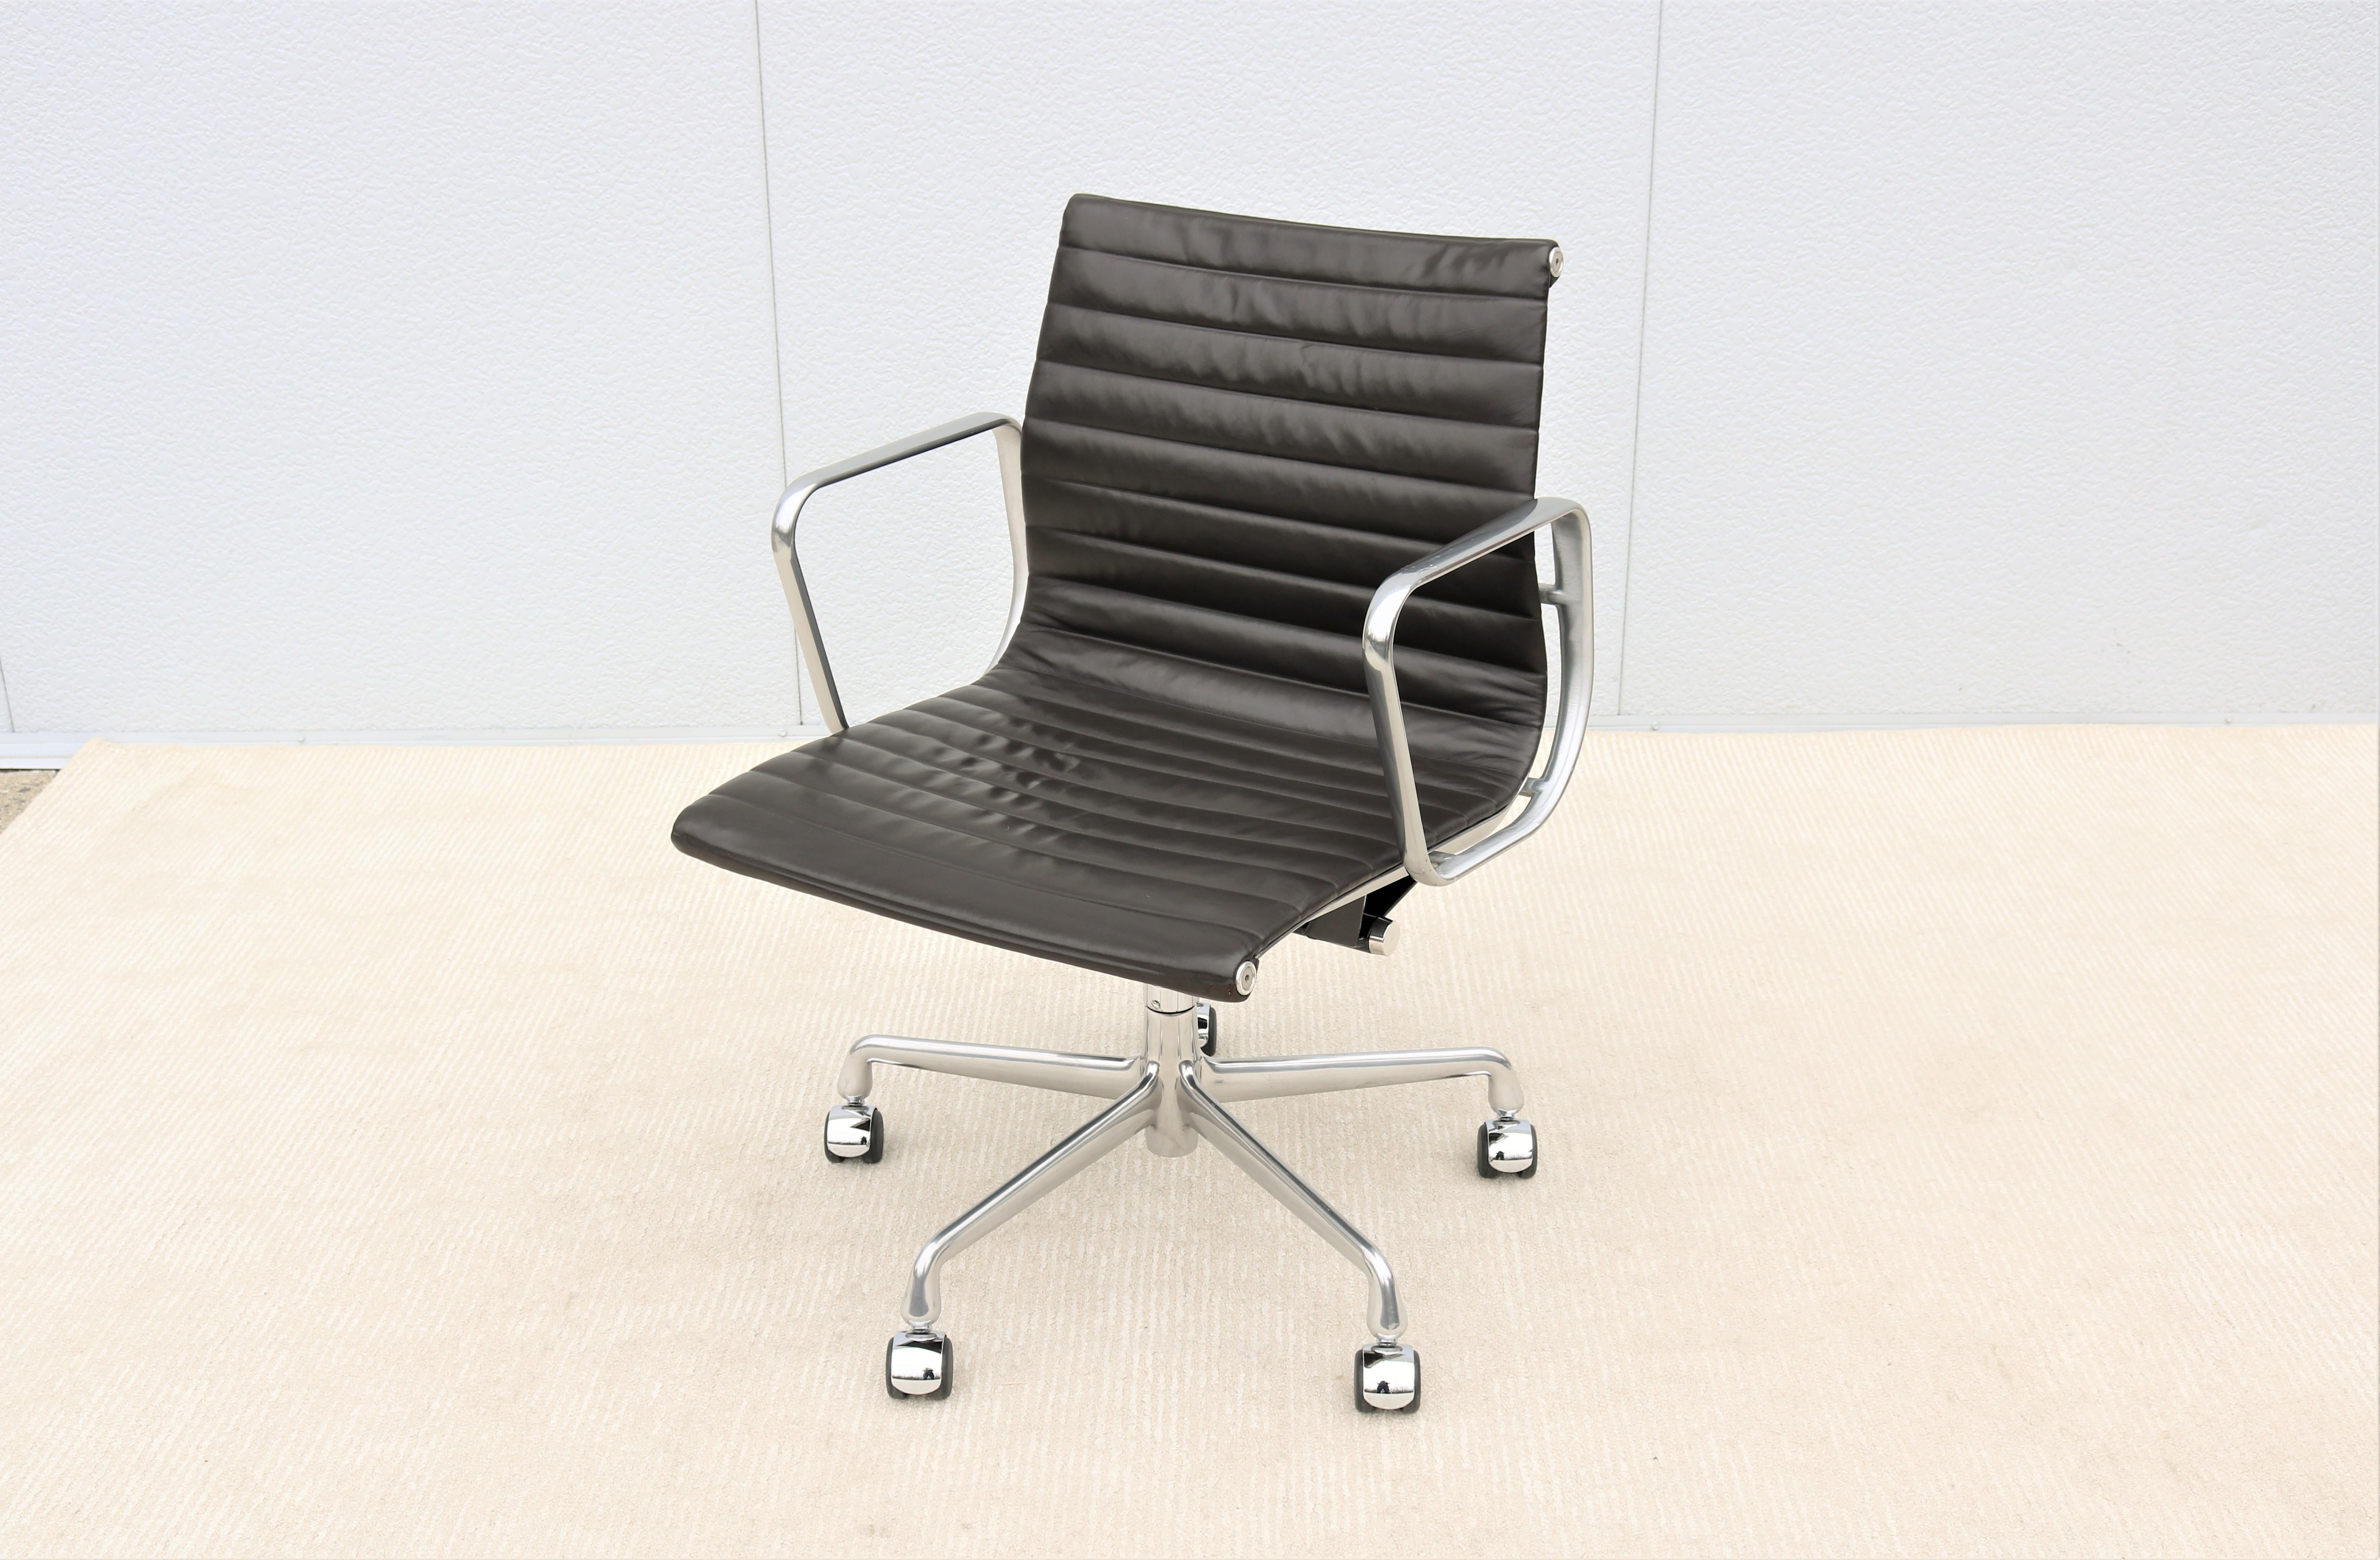 Stunning authentic Mid-Century Modern Eames aluminum group management chair.
A timeless design classic and contemporary with Innovative comfort features.
One of Herman Miller most popular chairs was designed in 1958 by Charles and Ray Eames.

Please